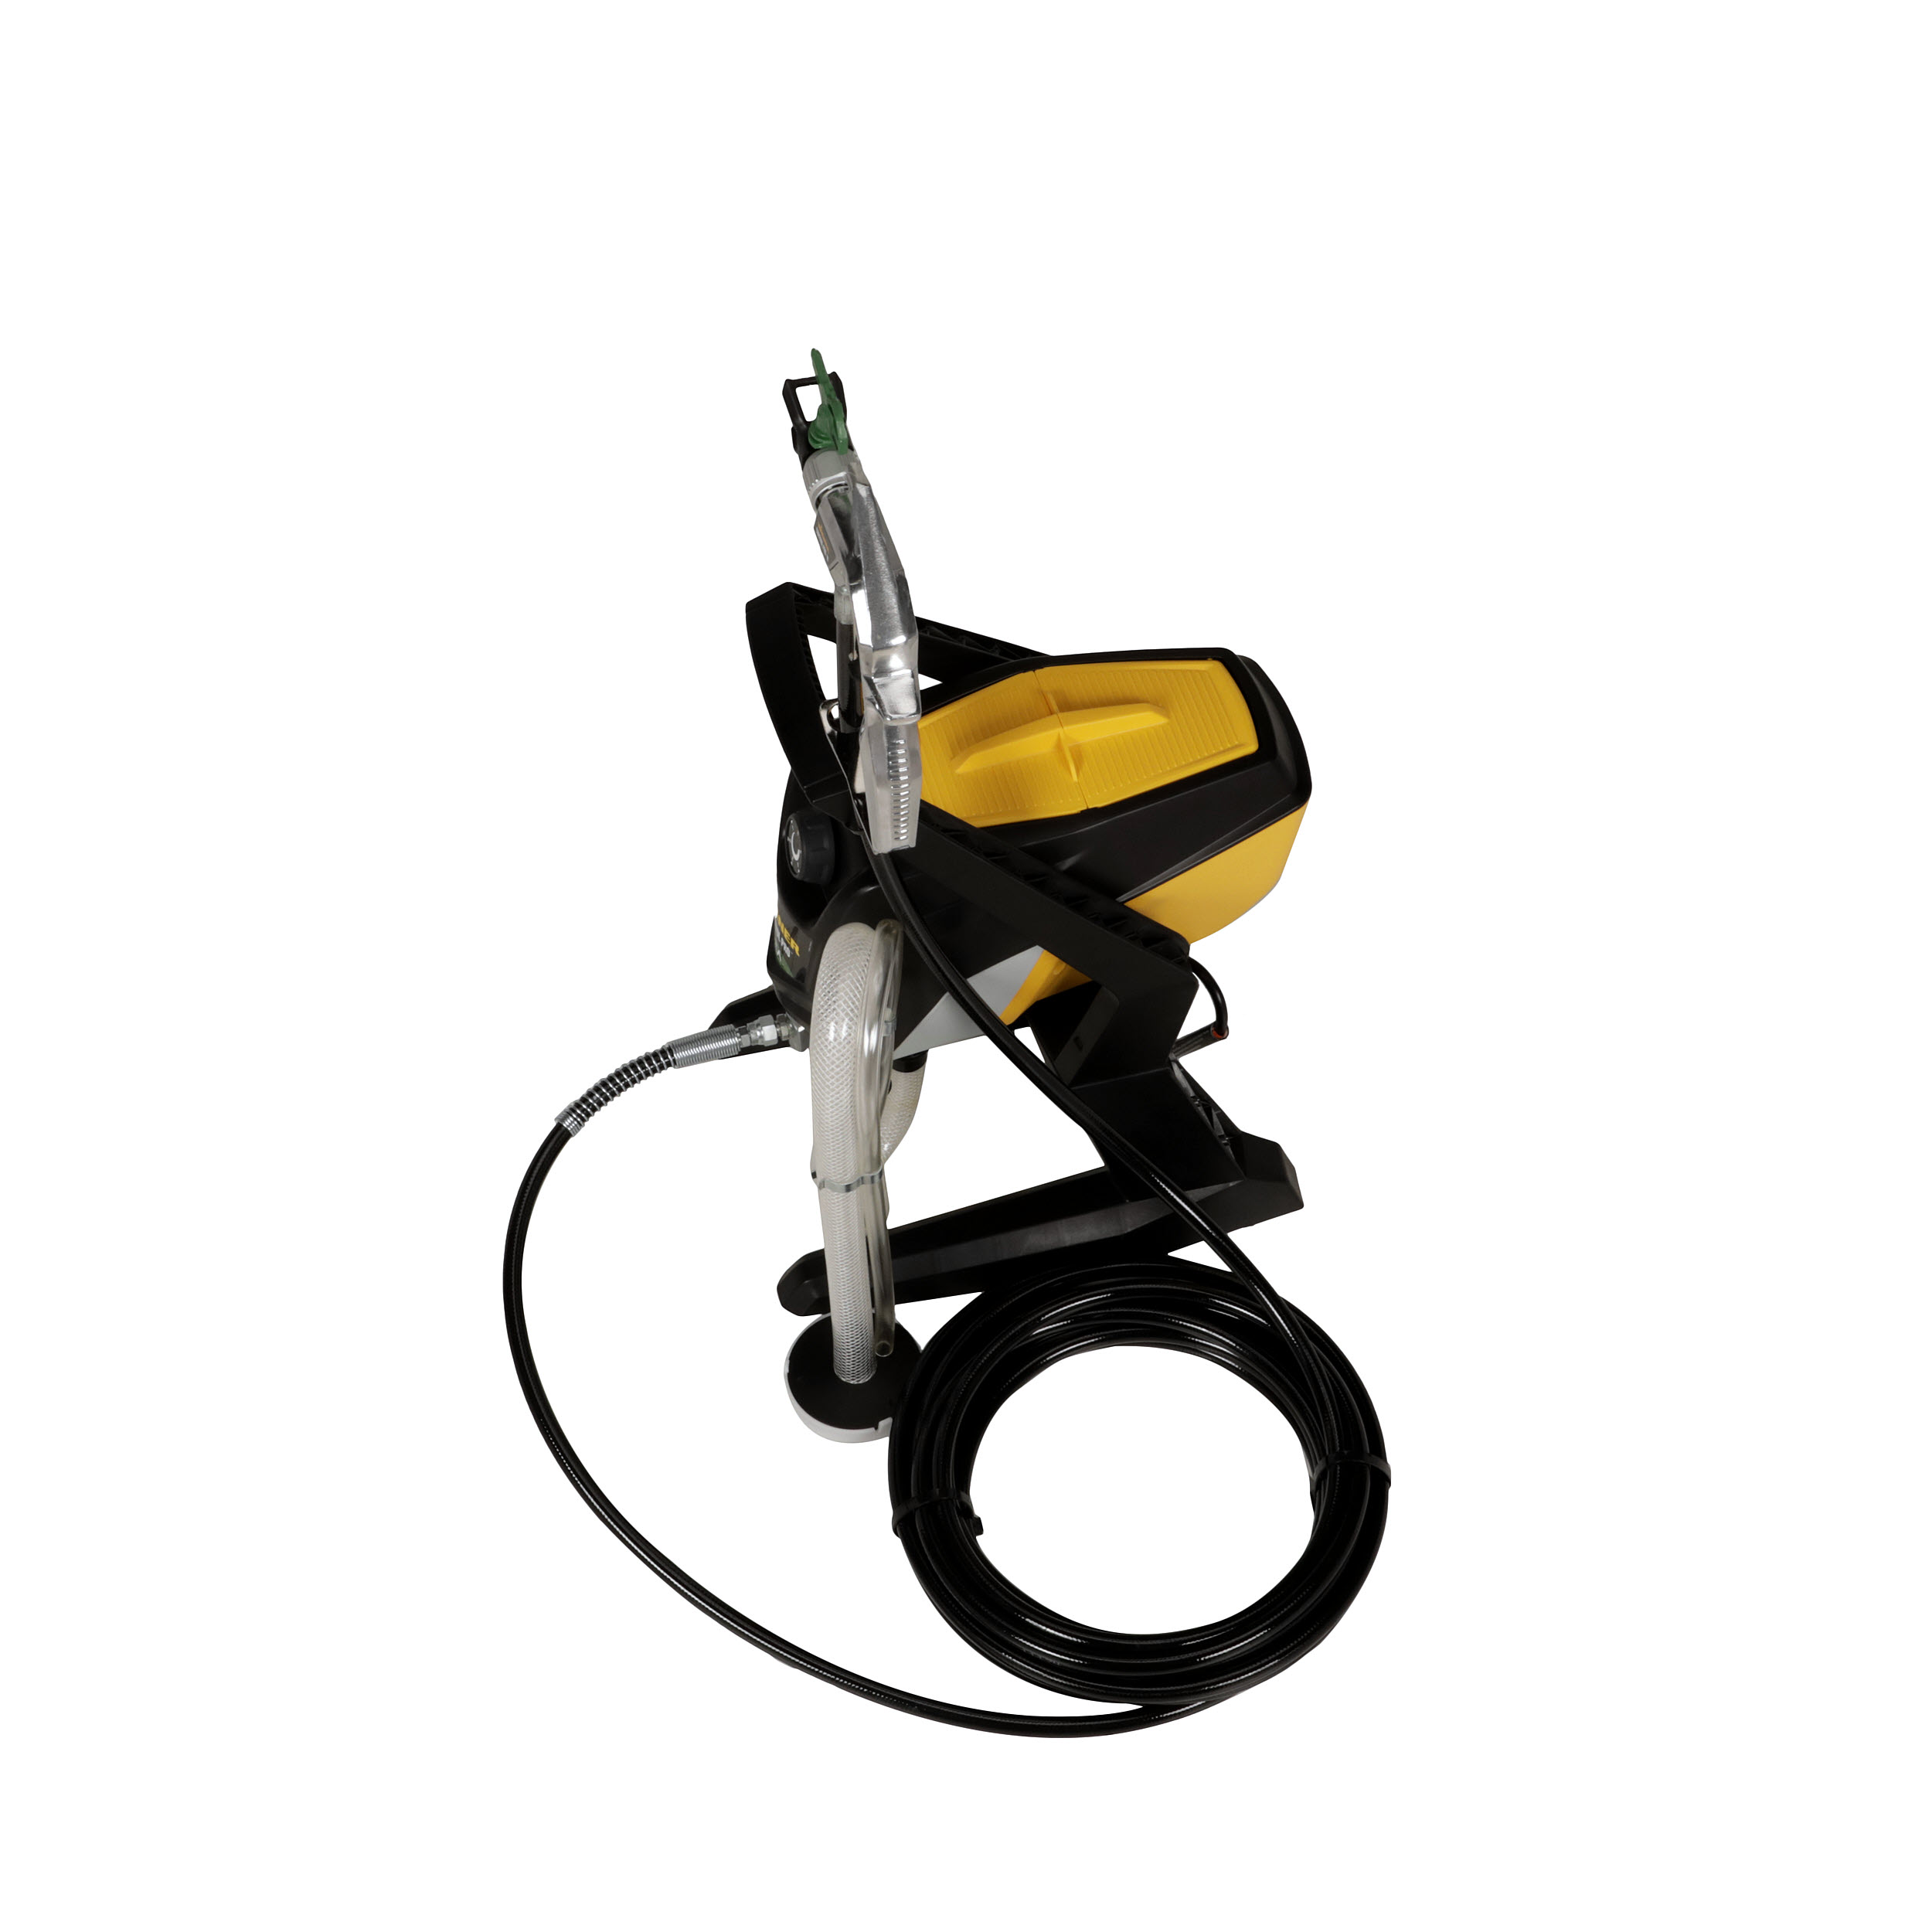 NEW* Wagner Control Pro 170 High Efficiency Airless Sprayer ( 0580001 )  24964251056